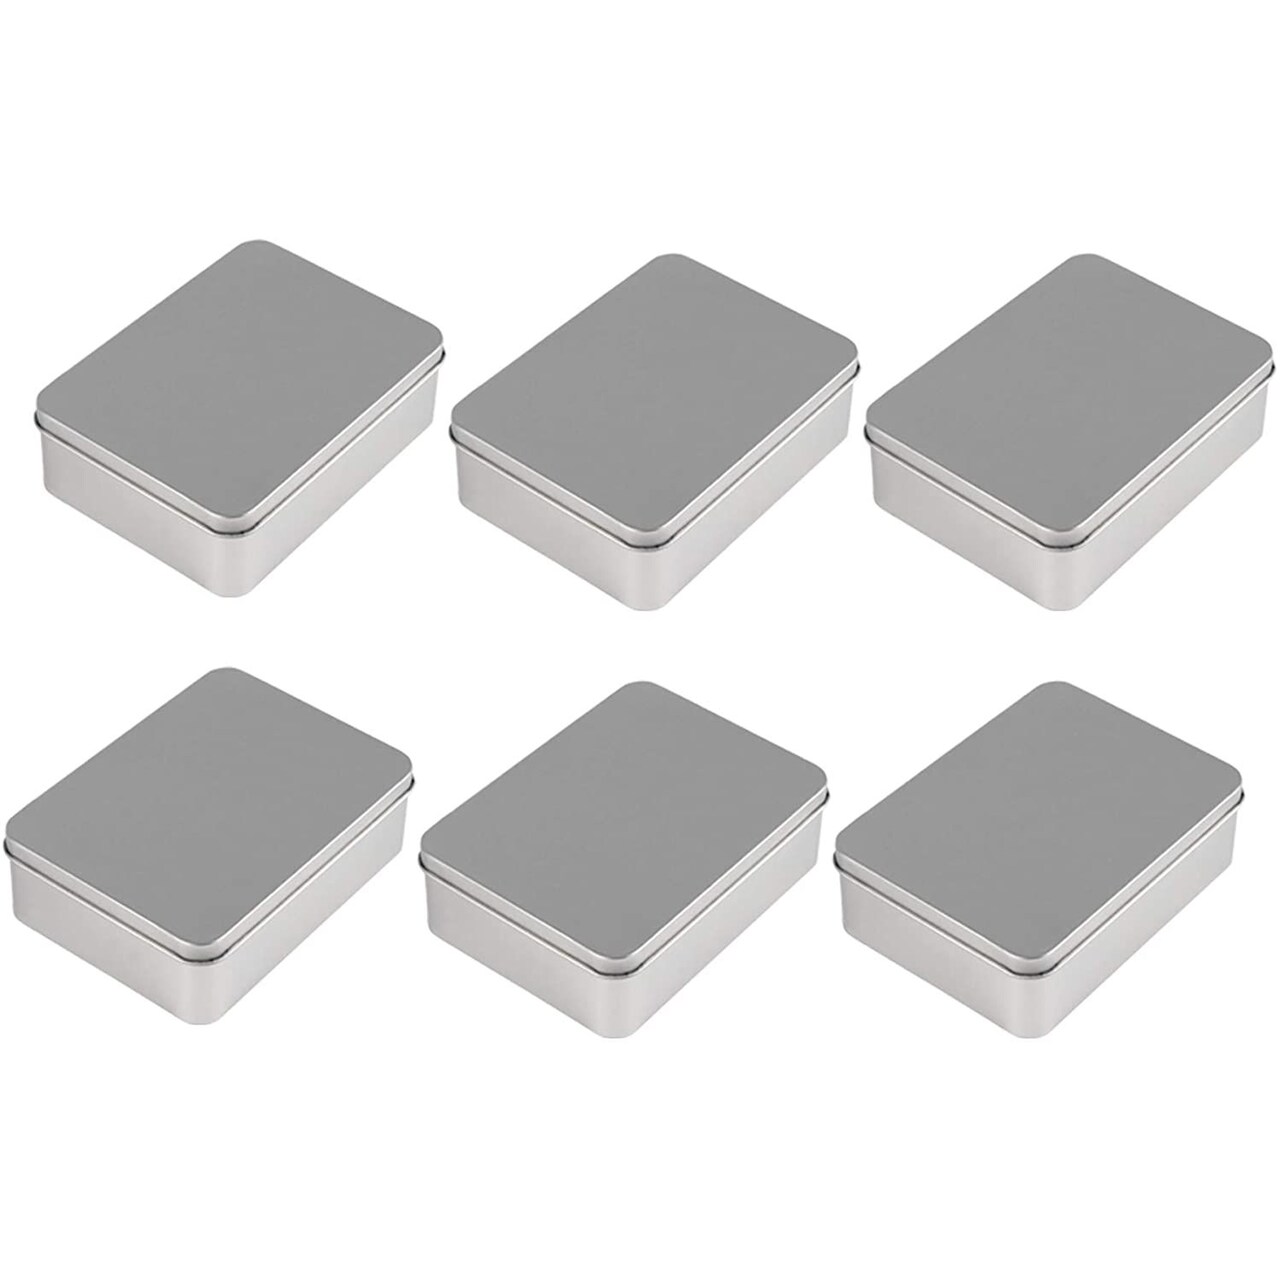 6-Pack Silver Metal Cookie Tins with Lids - Small Rectangular Tin Boxes for  Gift Giving, Home Organization (4.9x3.7x1.6 In)